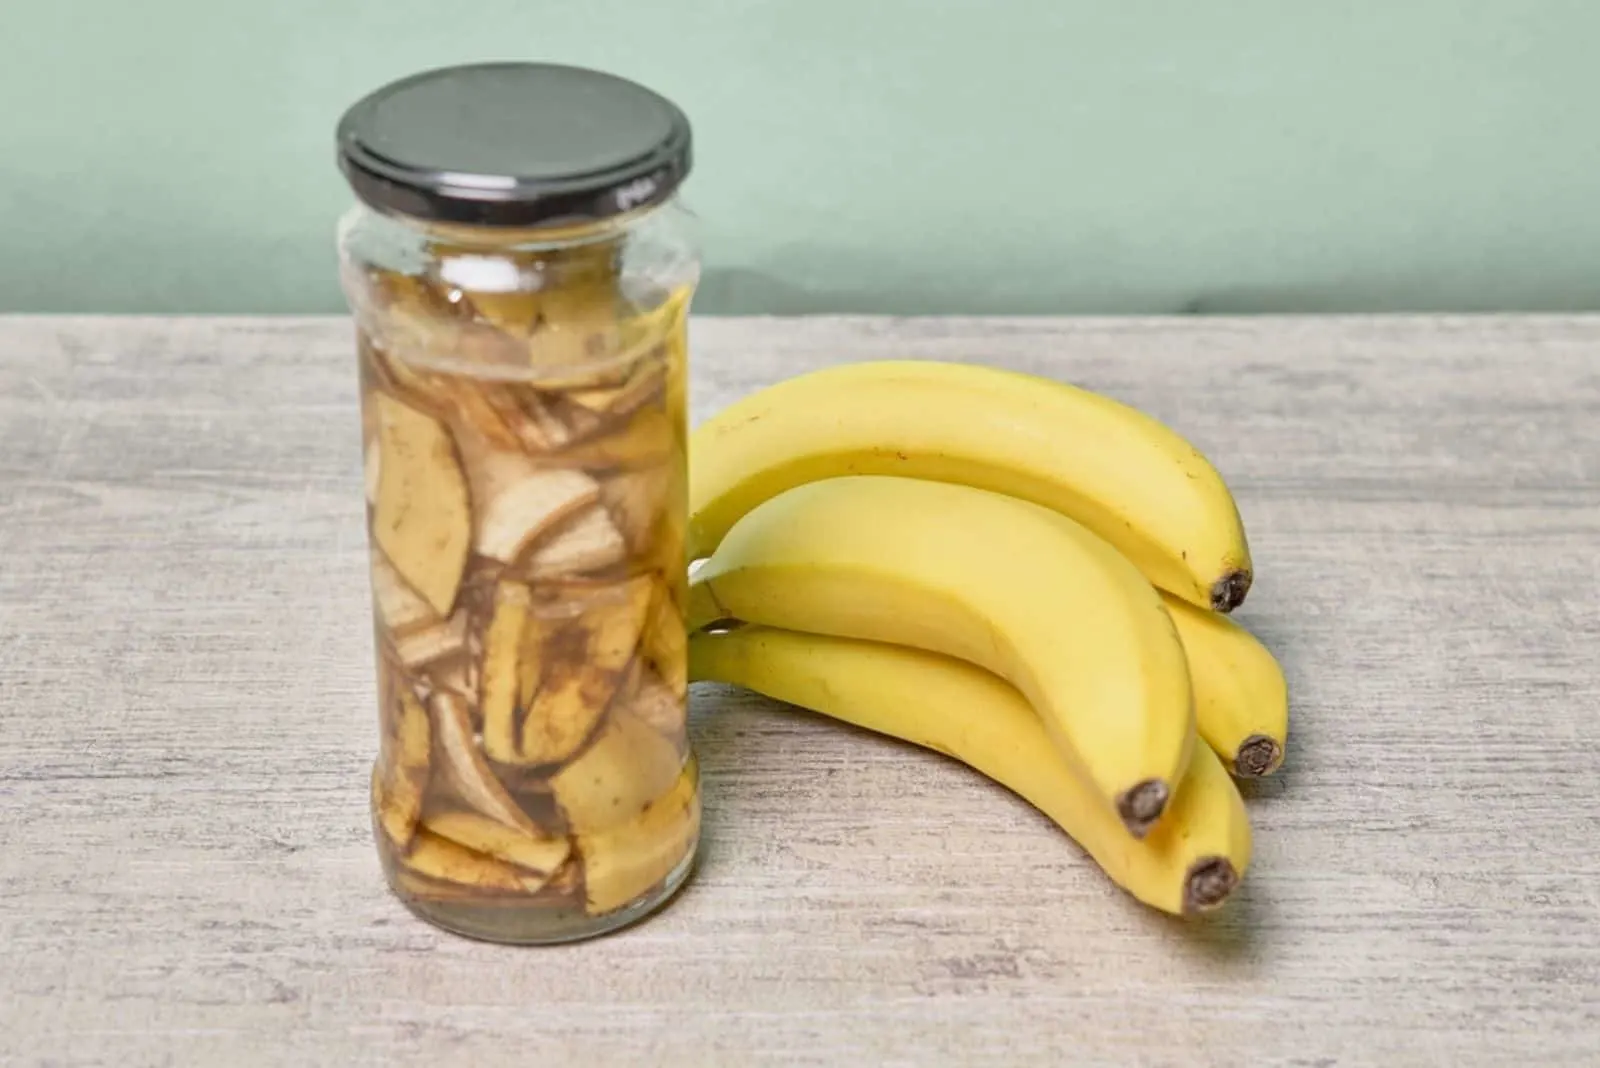 A jar filled with banana peel cuts and water